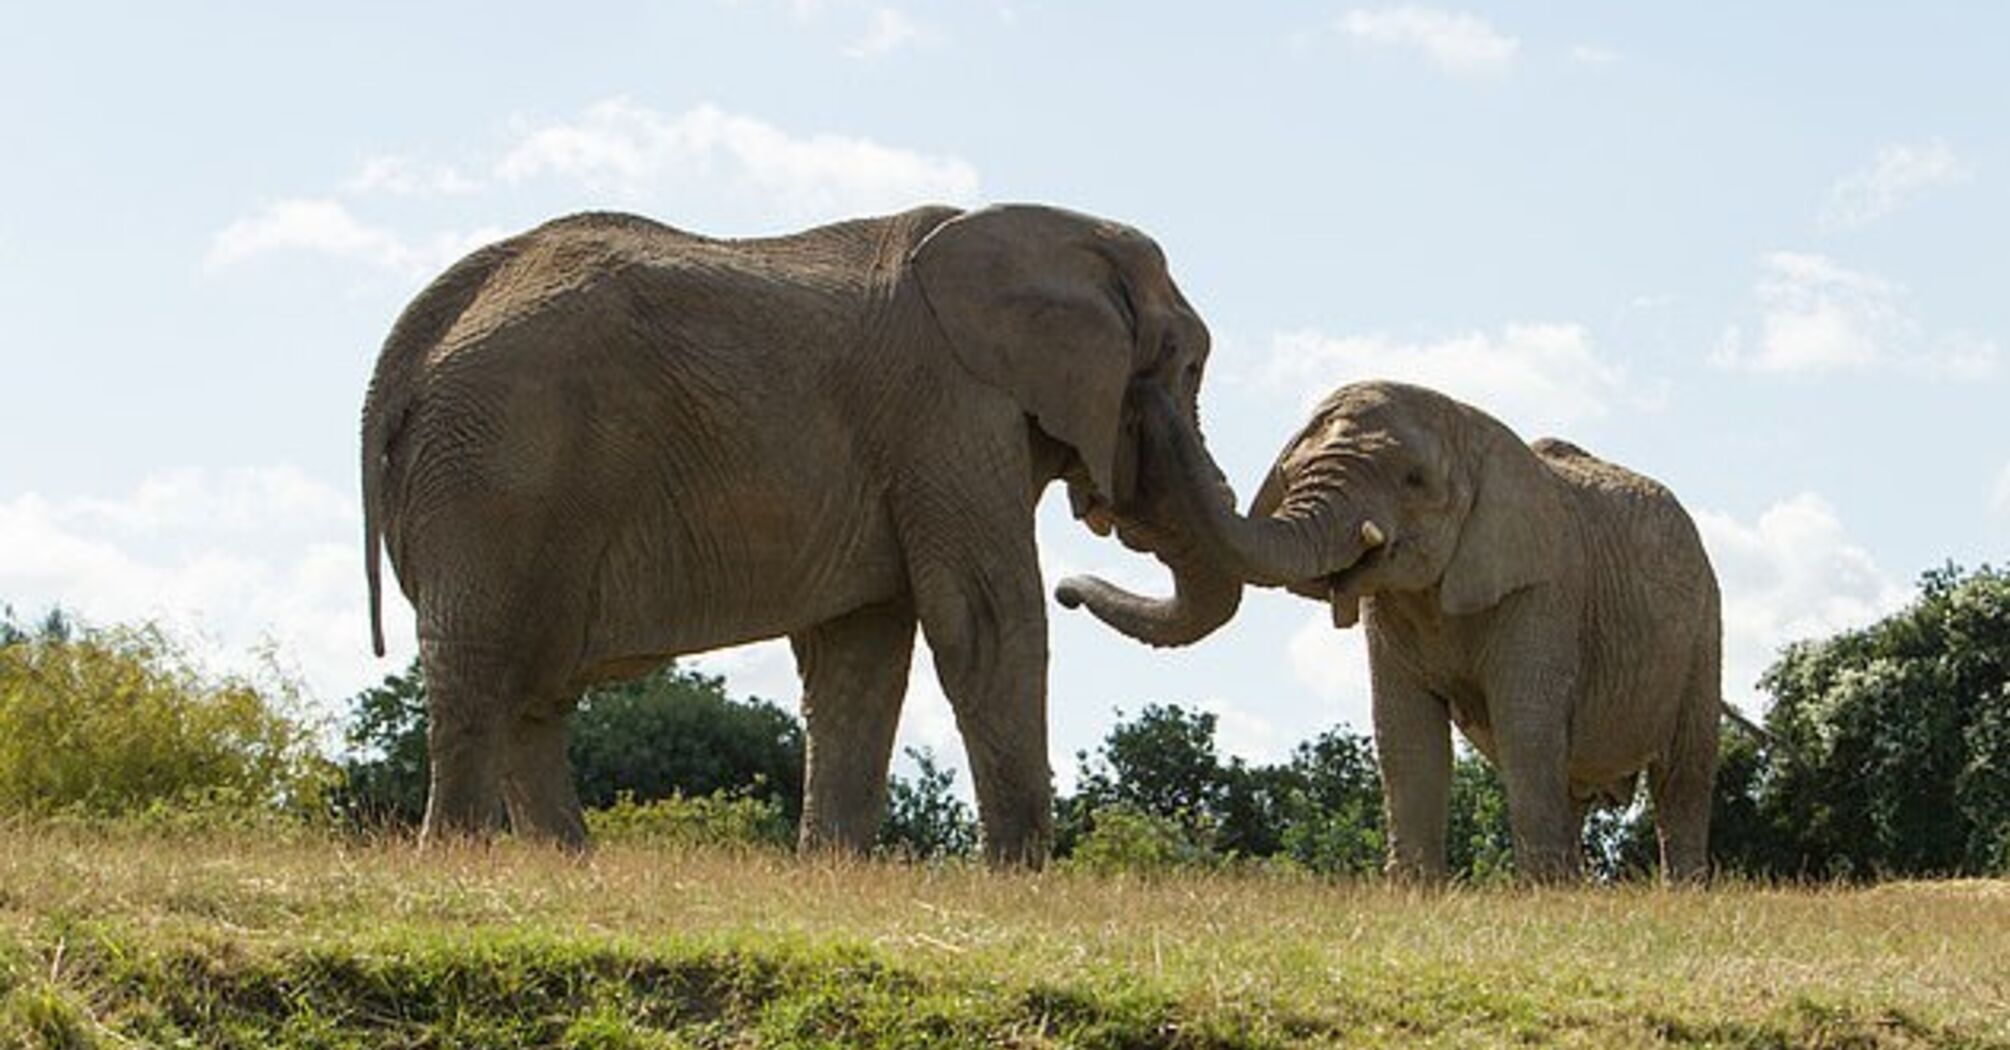 13 elephants to be transported from Britain to Africa